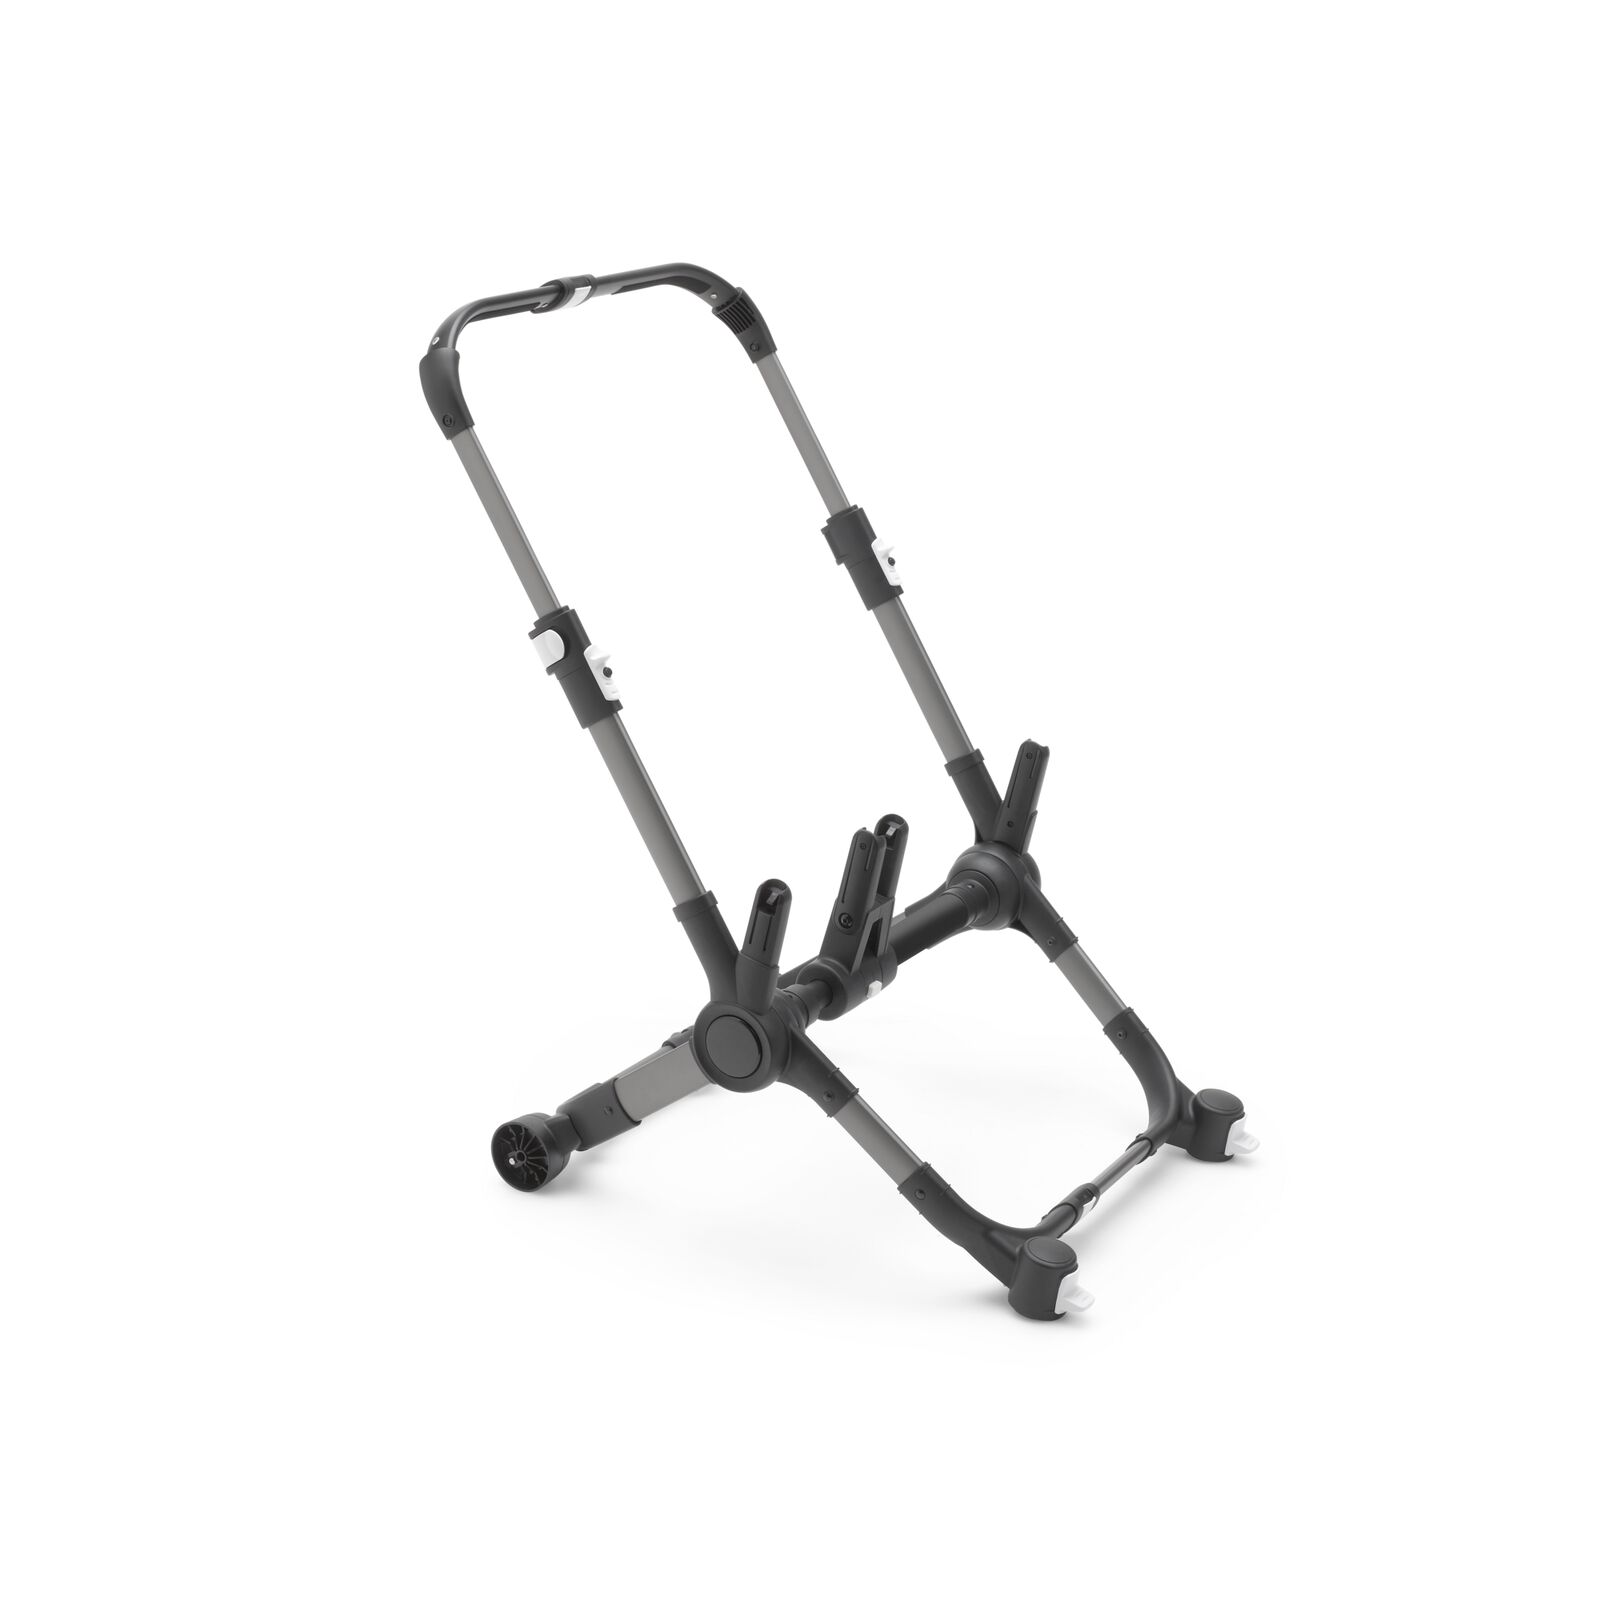 Bugaboo Donkey 5 chassis - View 2